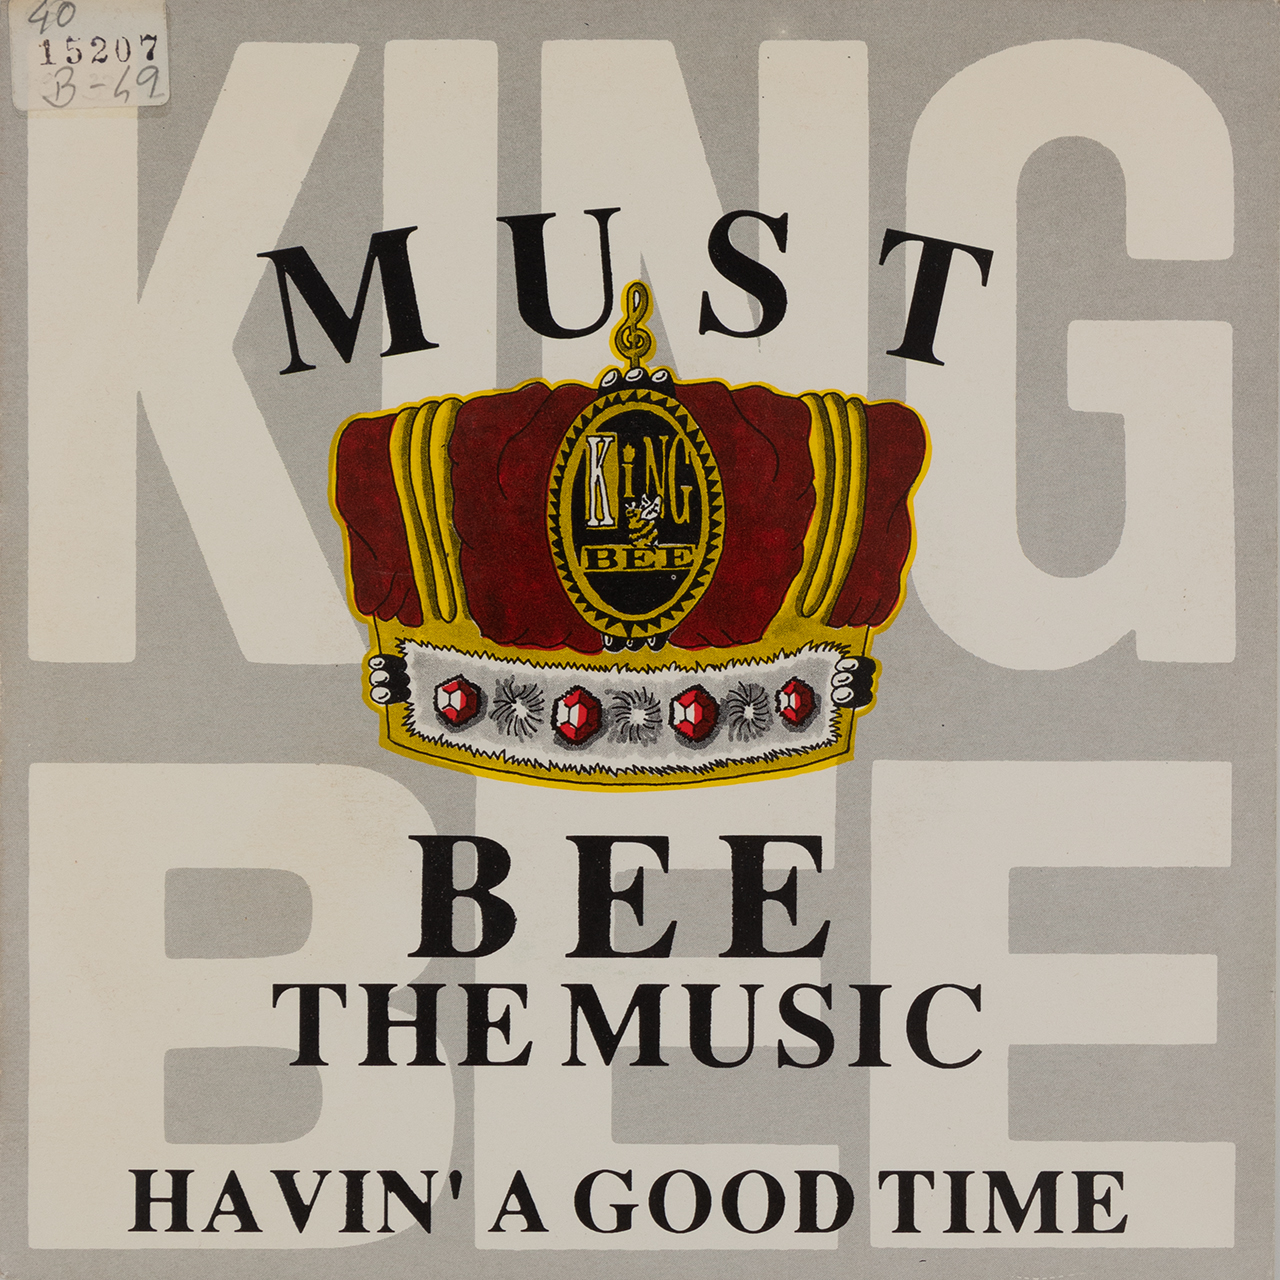 Must Bee the Music